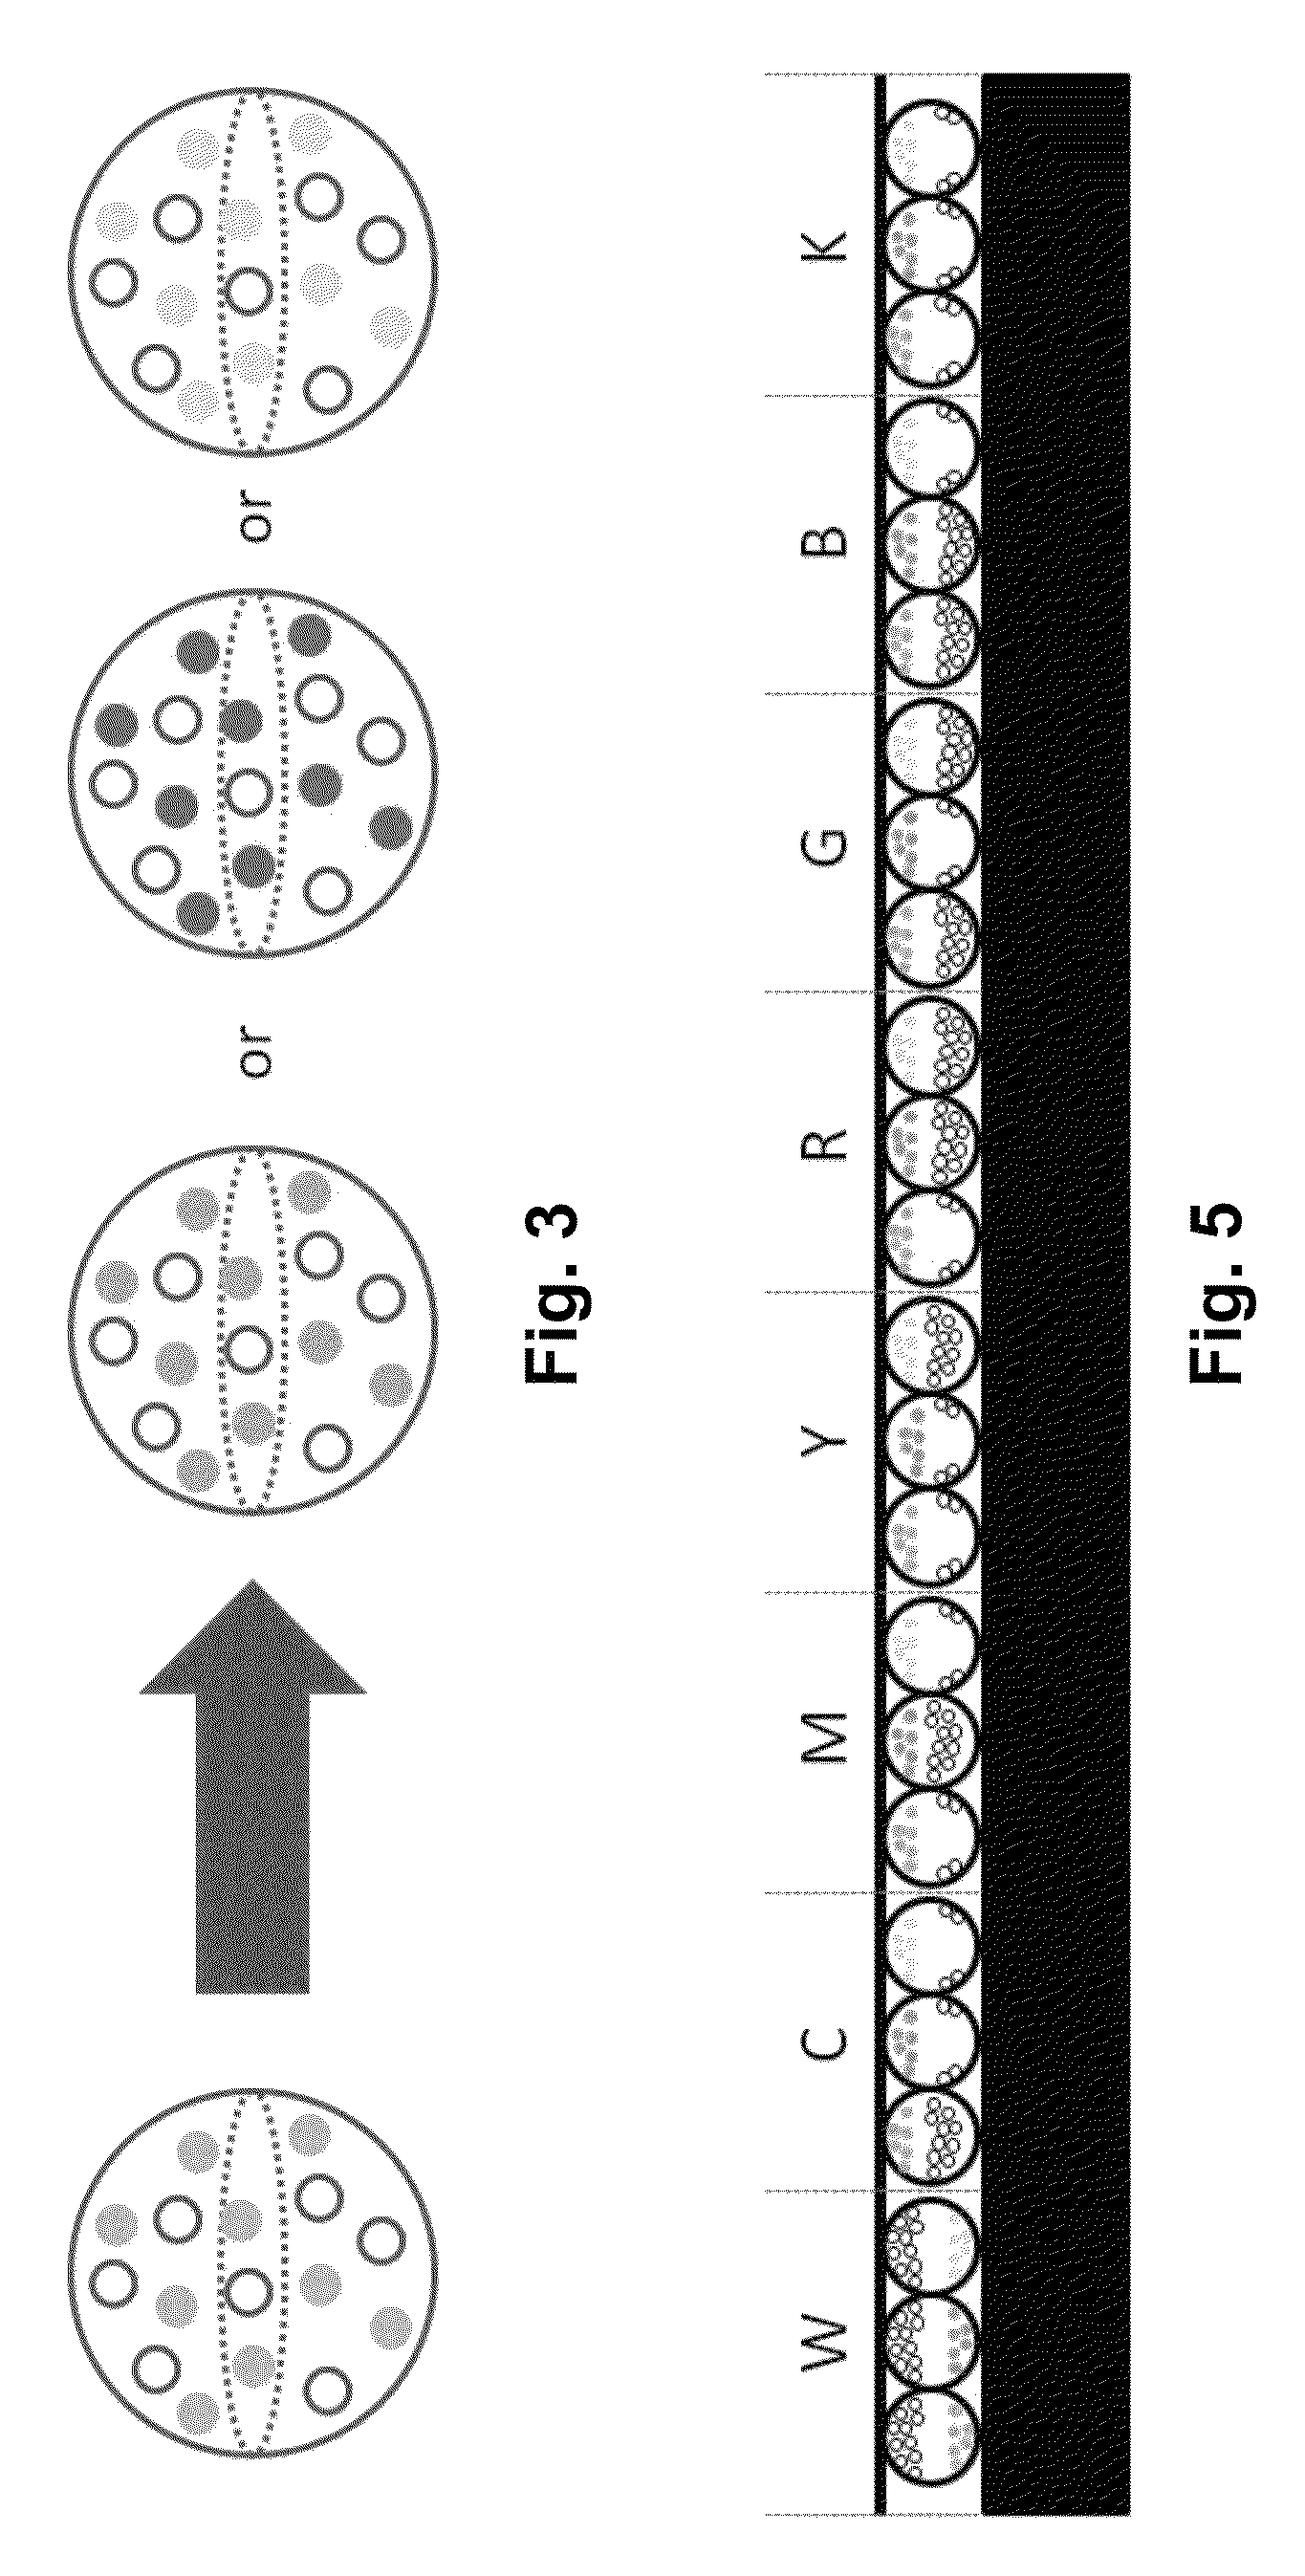 Patterned electro-optic displays and processes for the production thereof